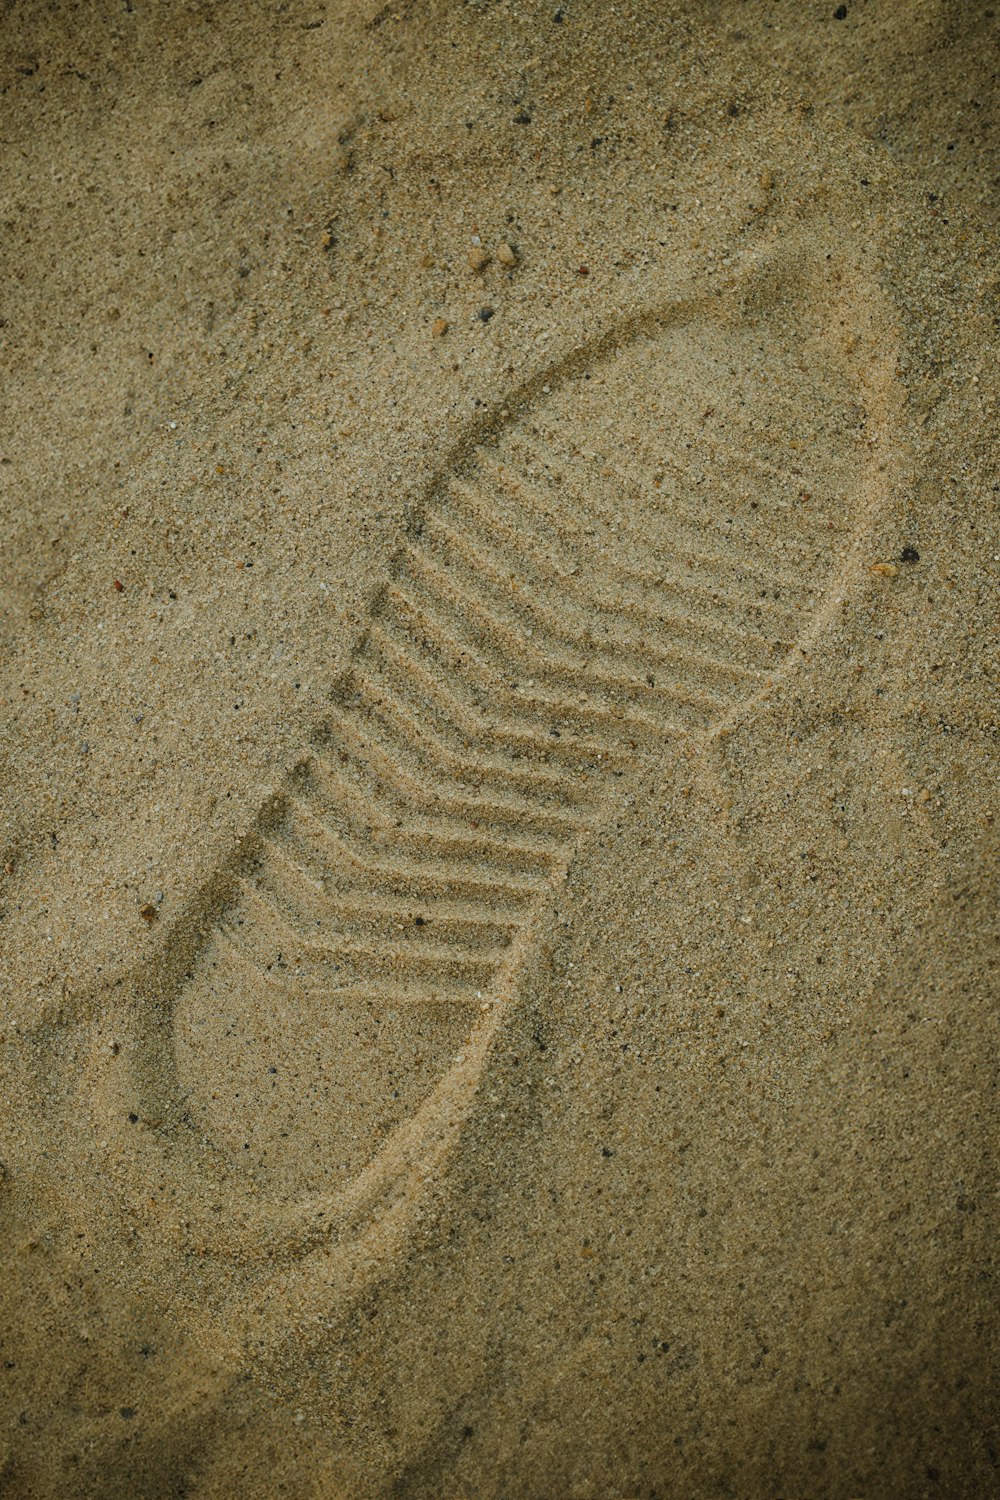 a picture of a shoe imprint in the sand